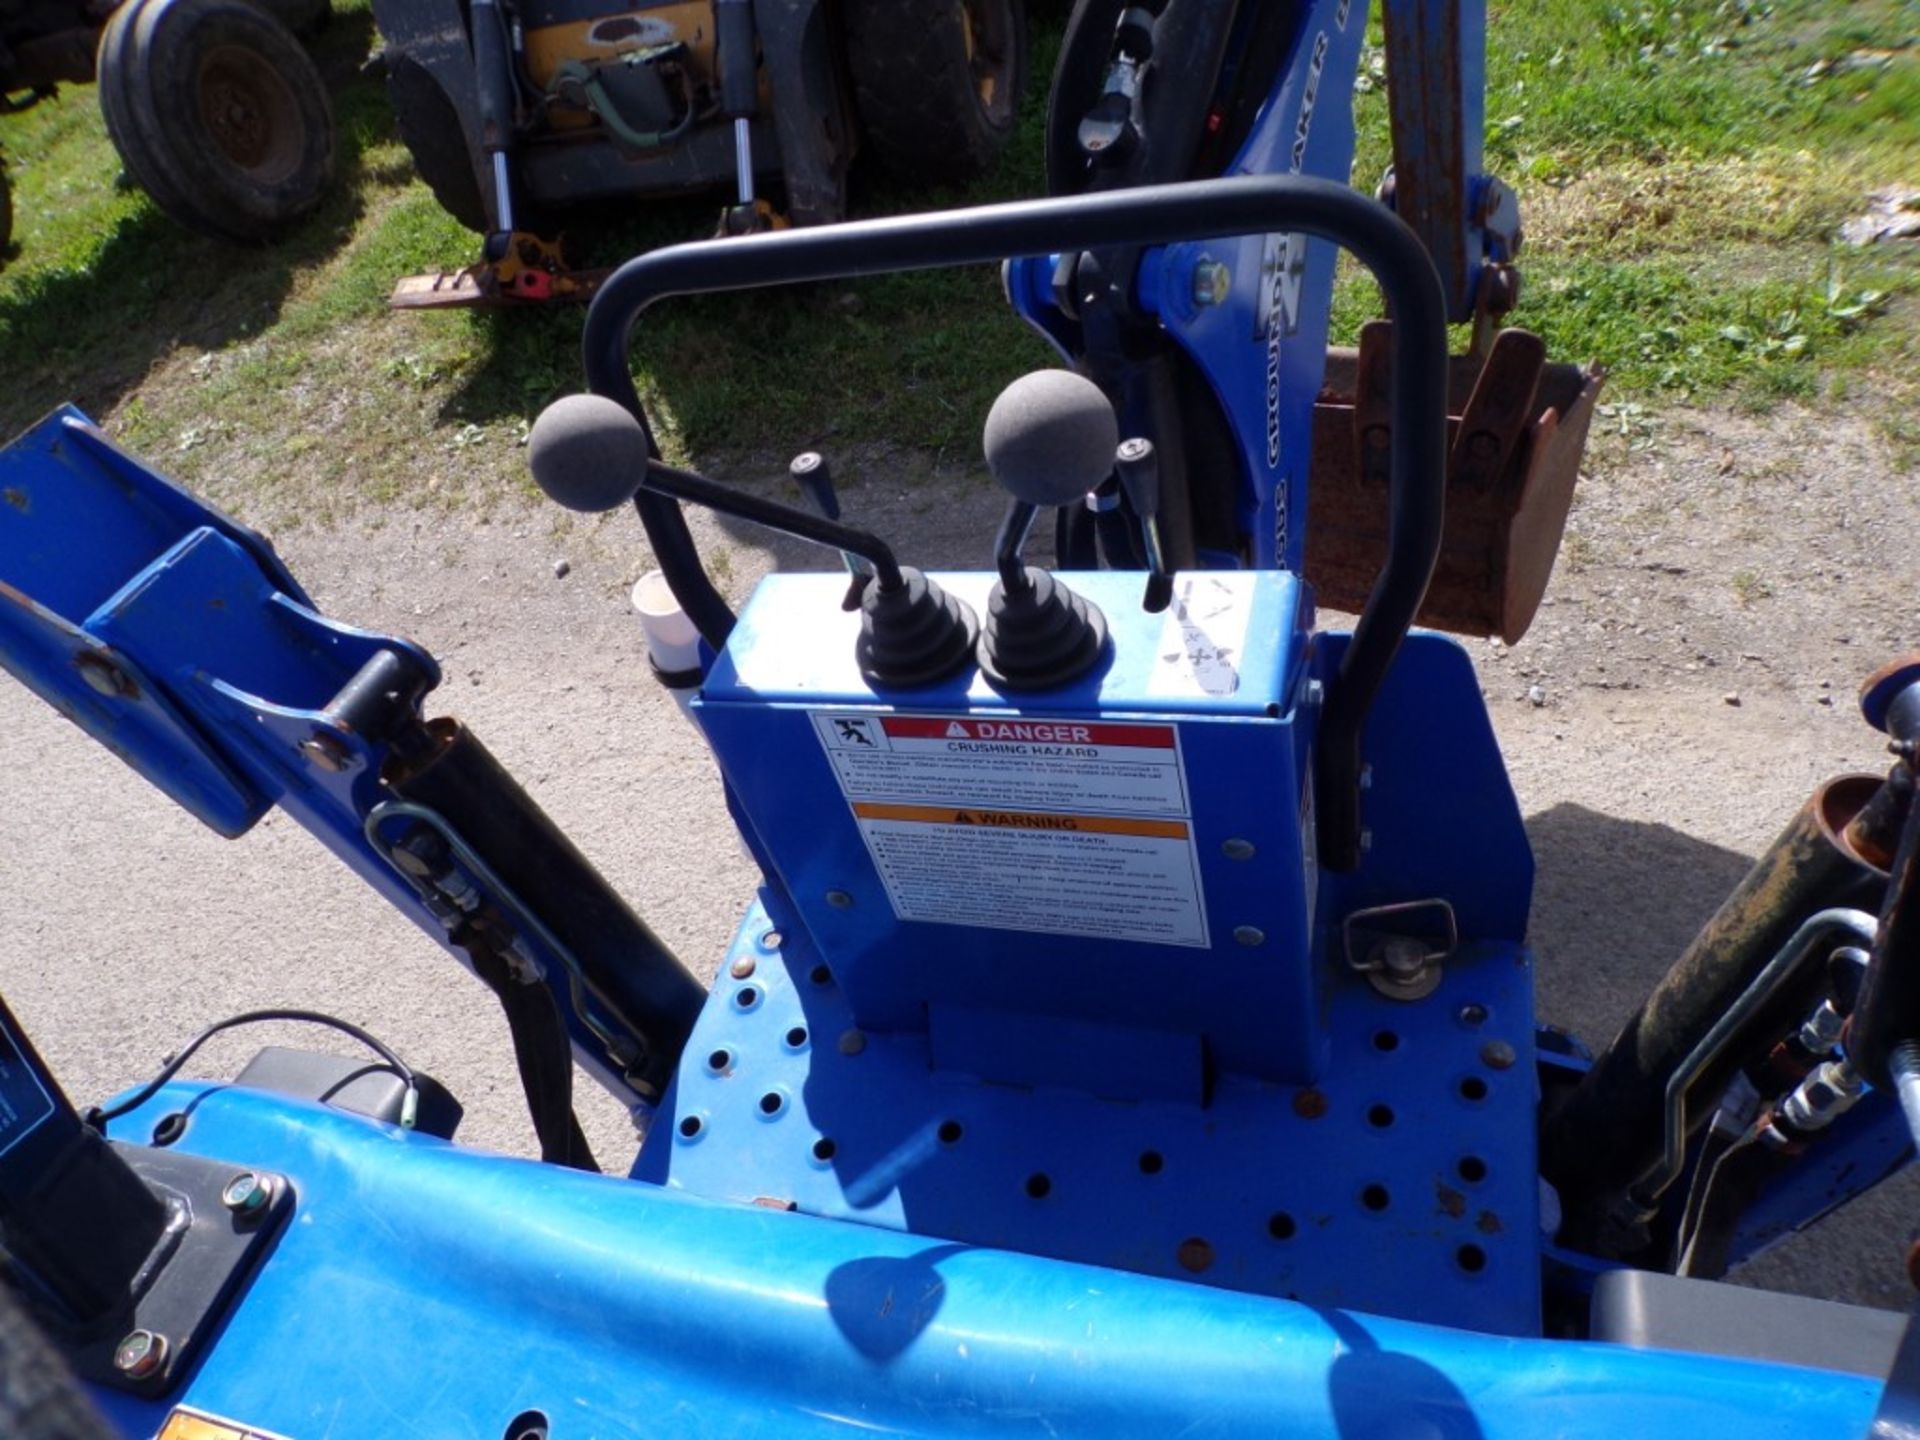 New Holland Boomer 1025 Tractor, 4 WD, Shibaura Dsl. Engine, N.H. 210TL Loader ARms And 48'' Bucket, - Image 6 of 6